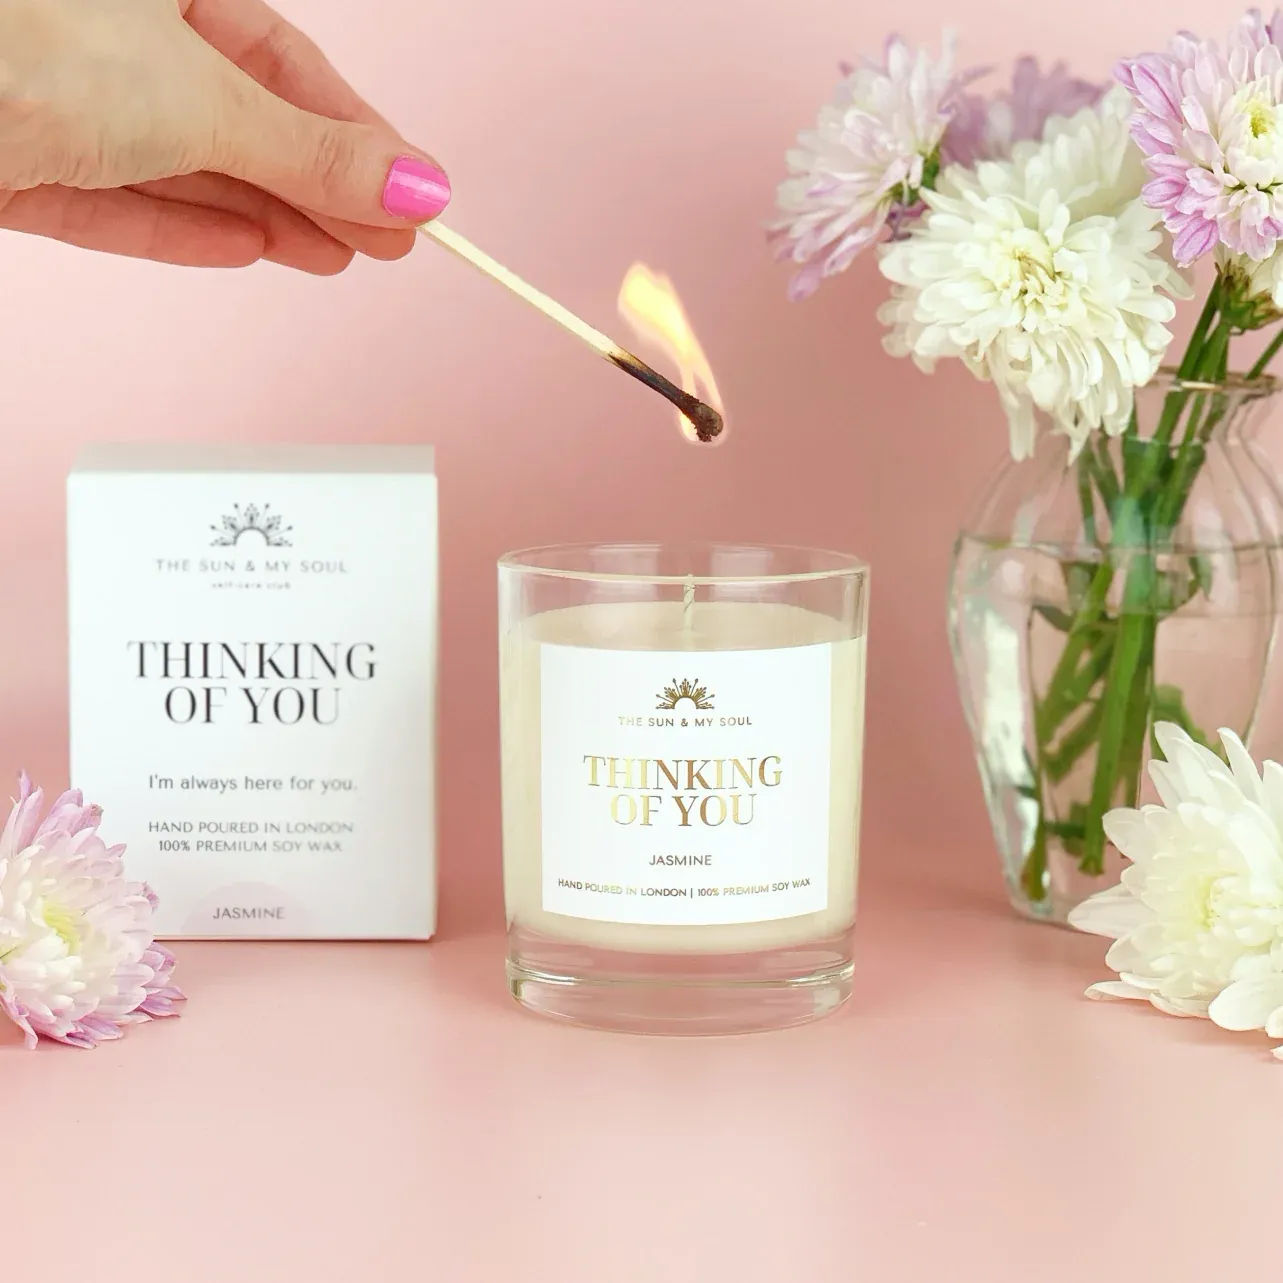 Thinking of You - Jasmine Scented Premium Soy Wax Candle